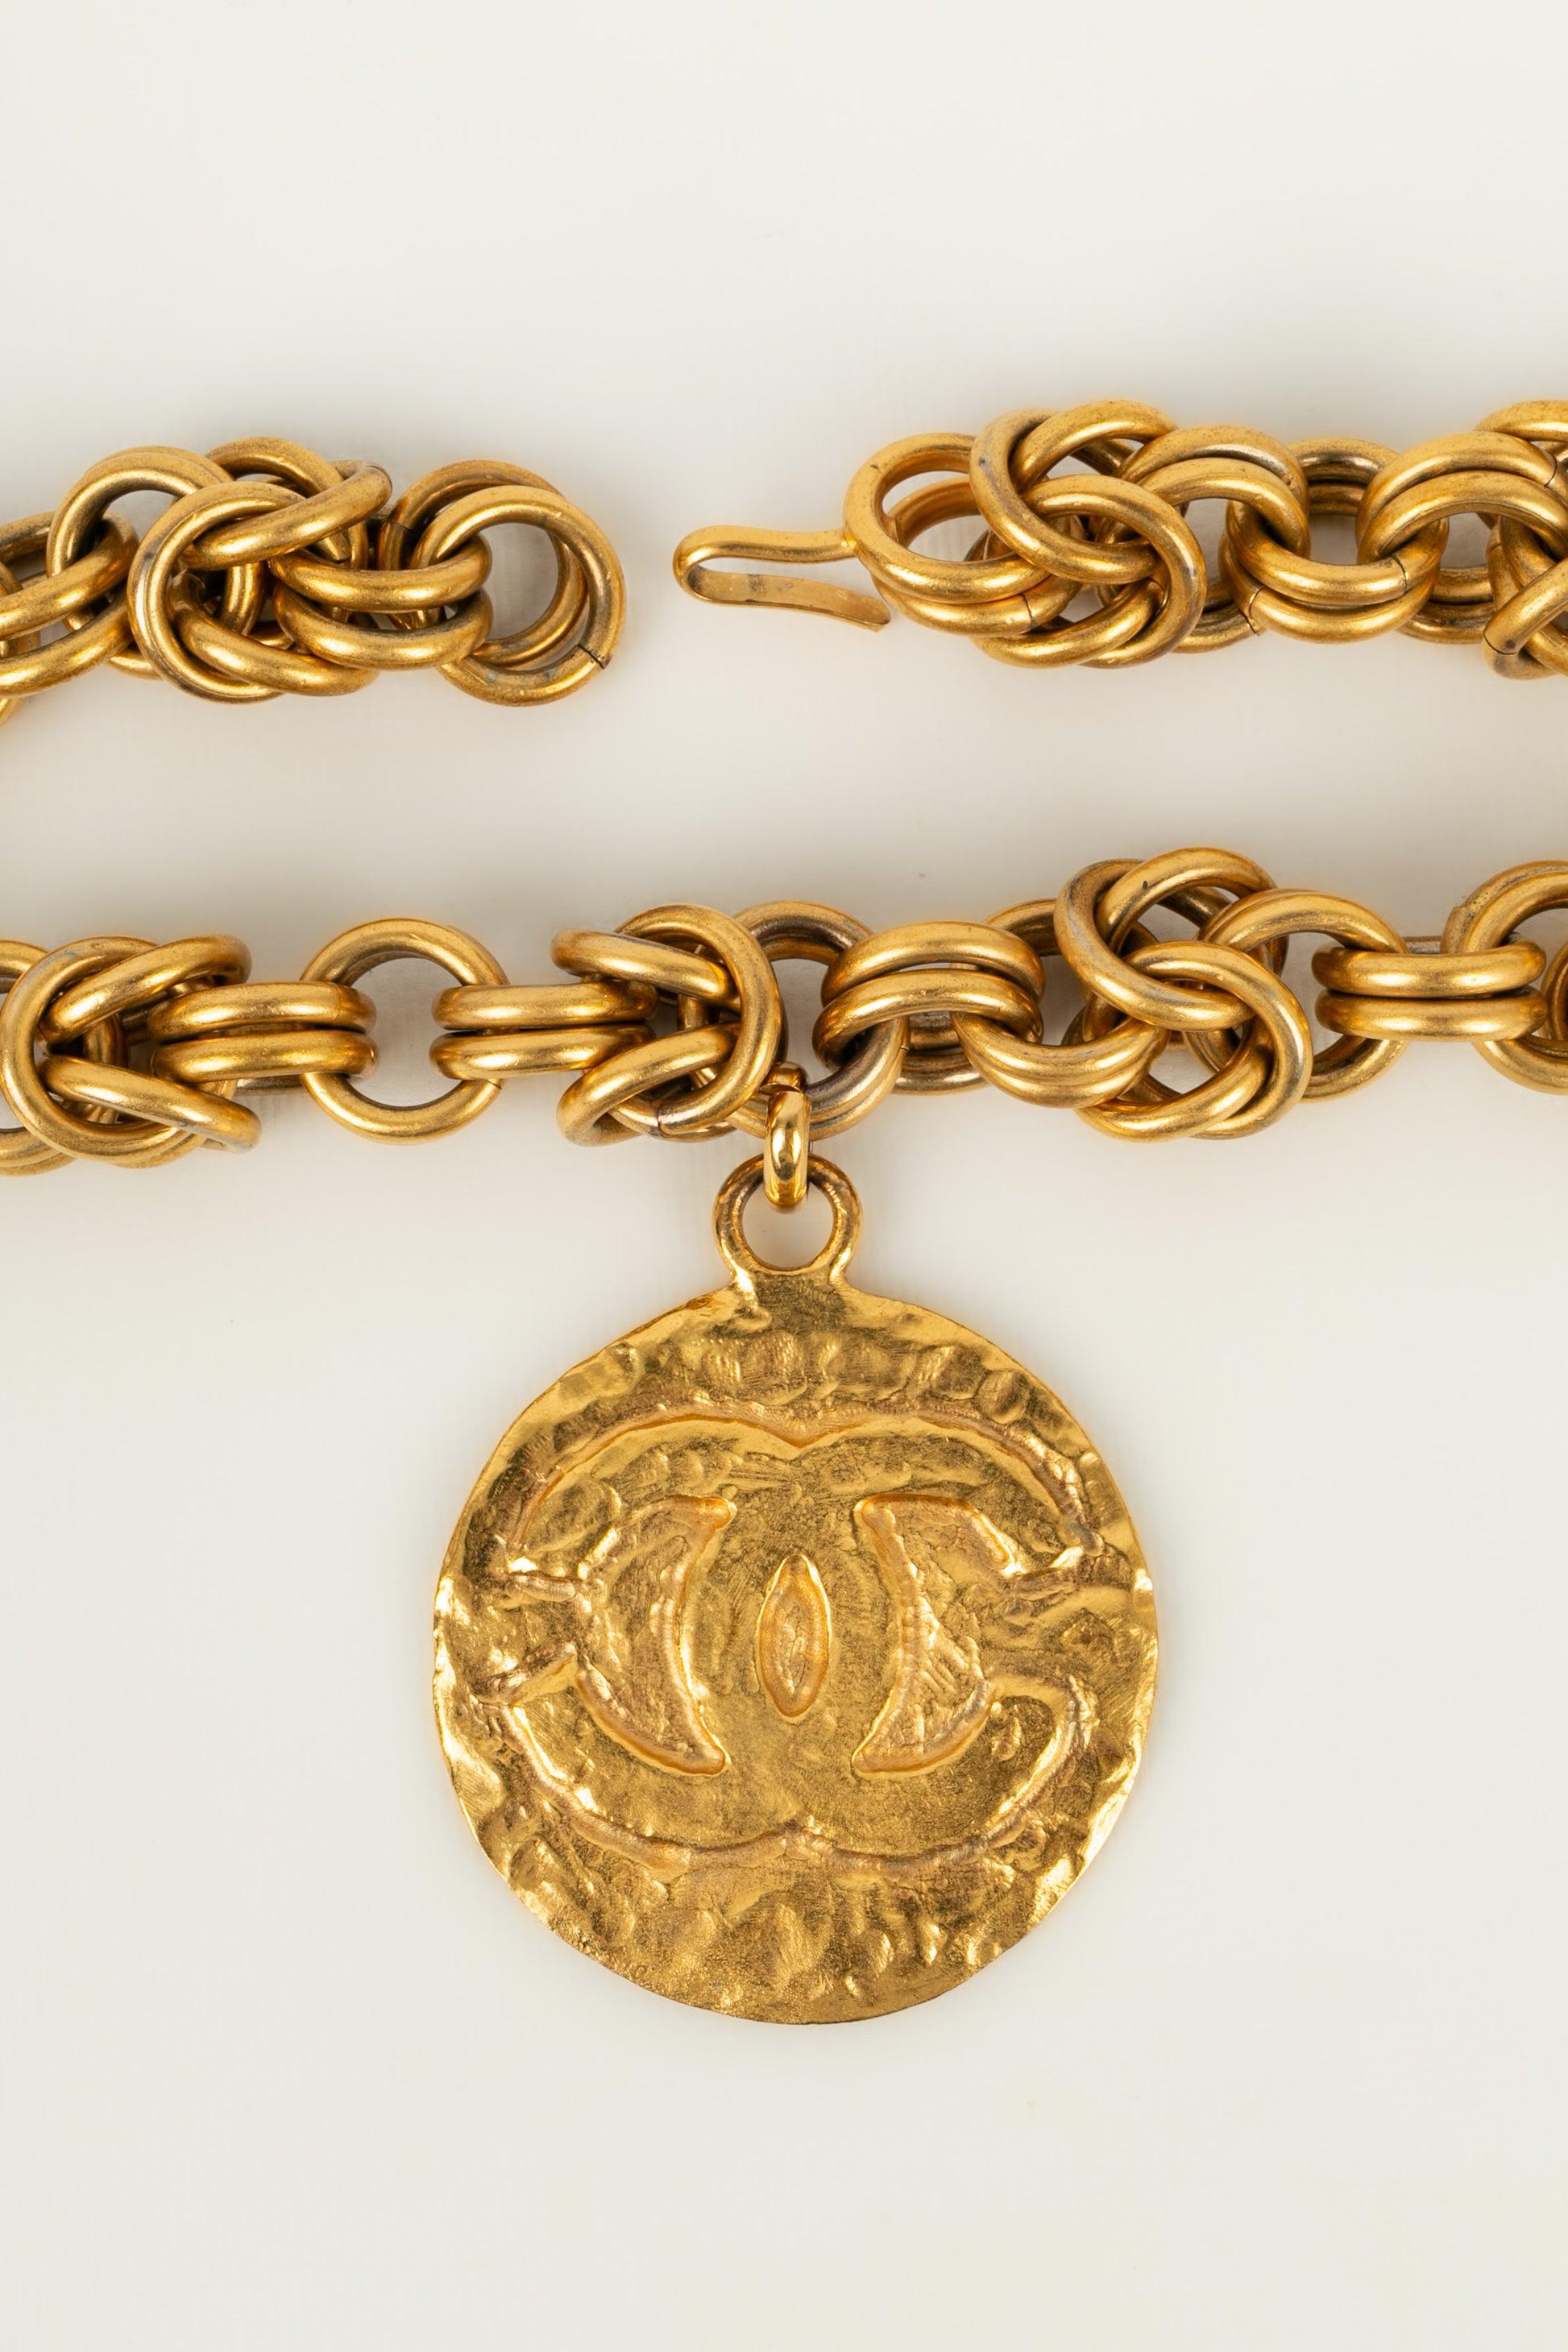 Chanel (Made in France) Impressive Haute Couture necklace in gold-plated metal with a cc pendant. Unsigned.

Additional Information:
Condition: Very good condition
Dimensions: Length: 79 cm

Seller Reference: CB29